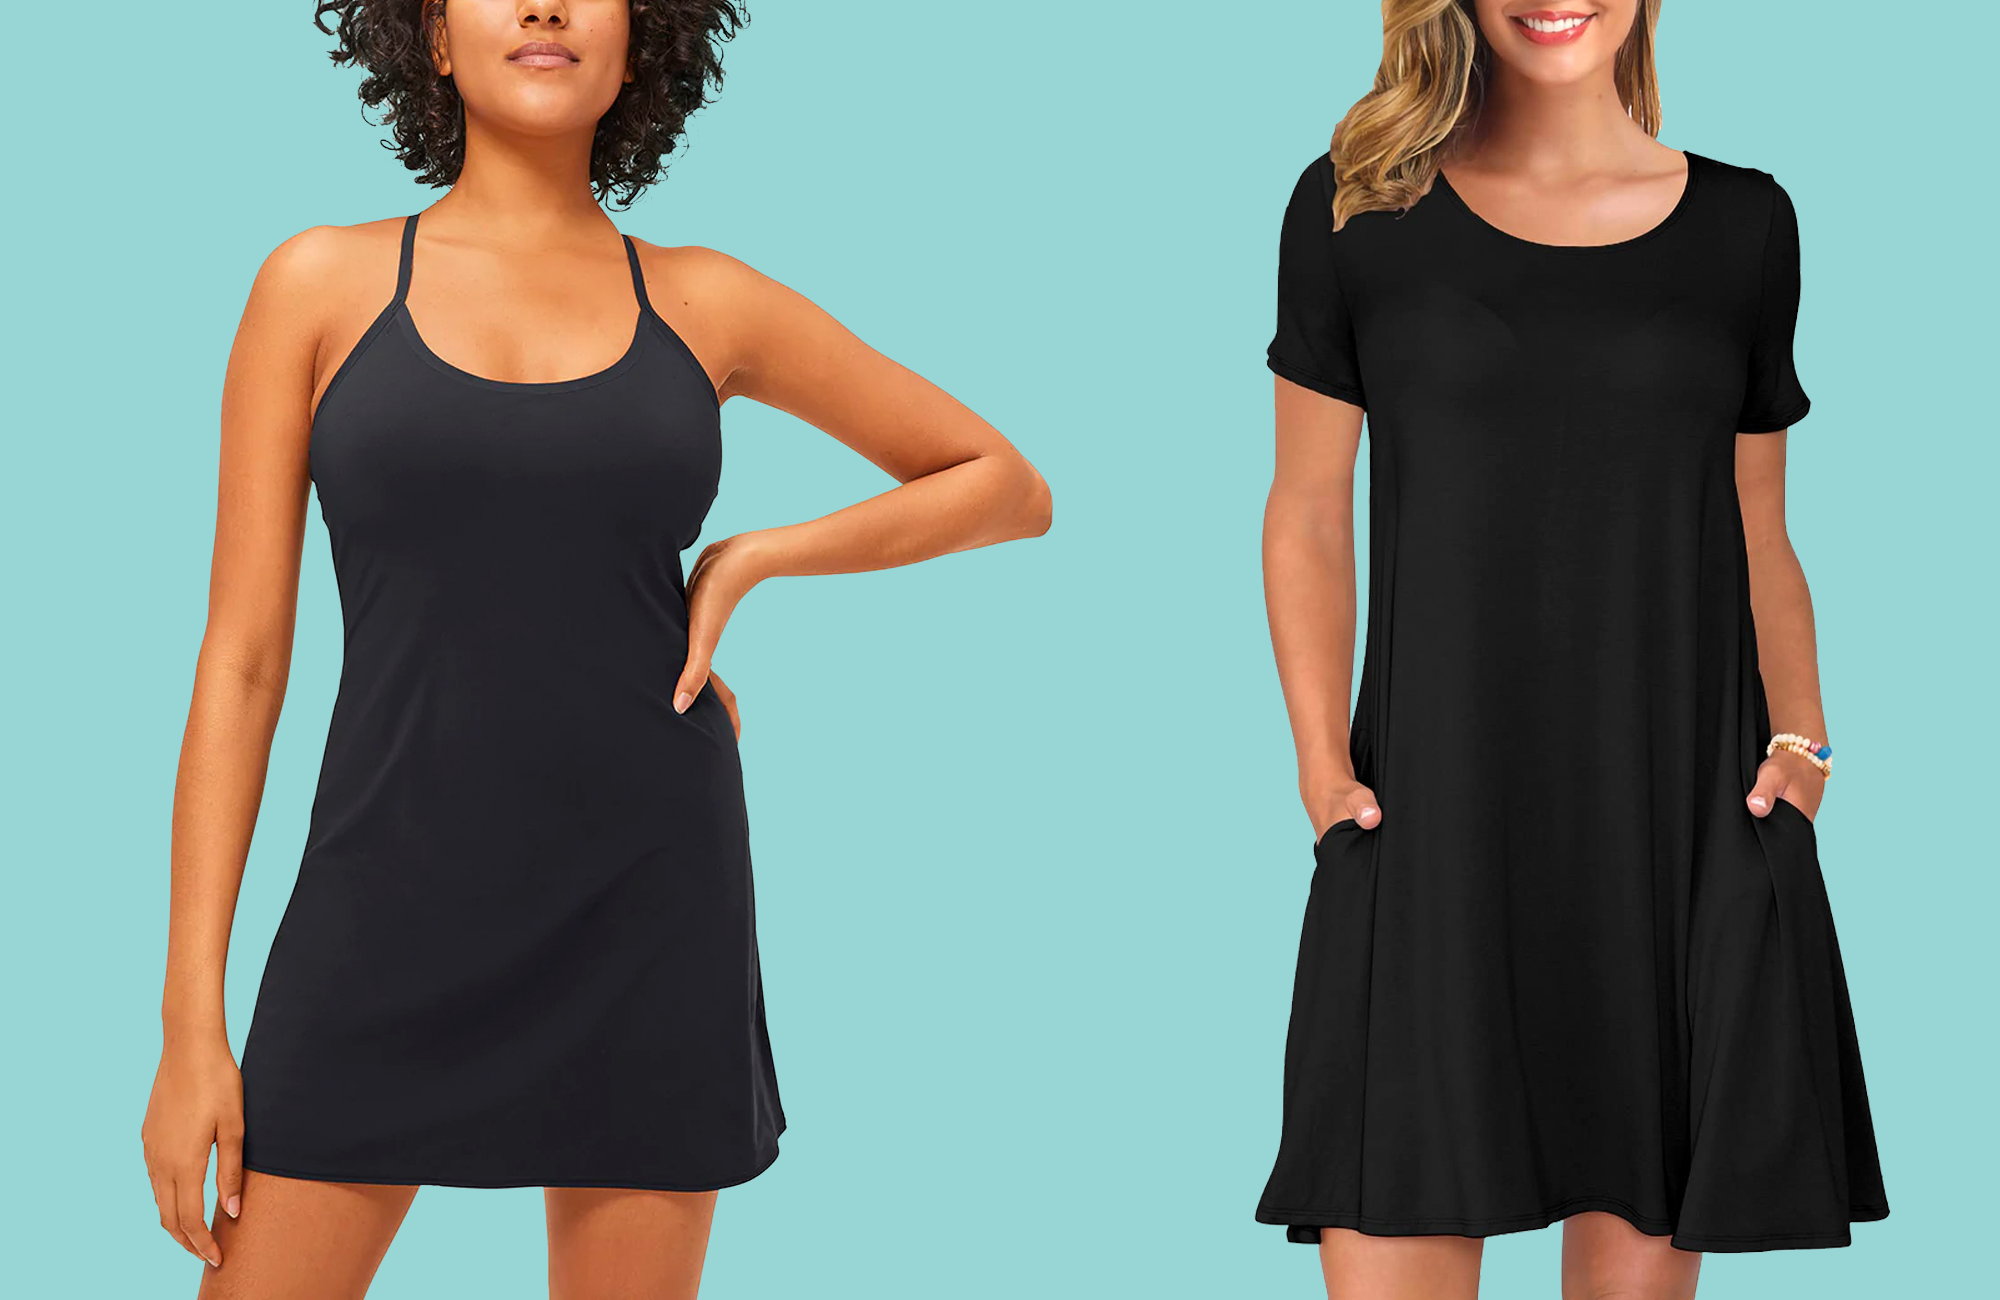 The Best Travel Dresses - Cute, Quick Drying & Wrinkle Free! (2021